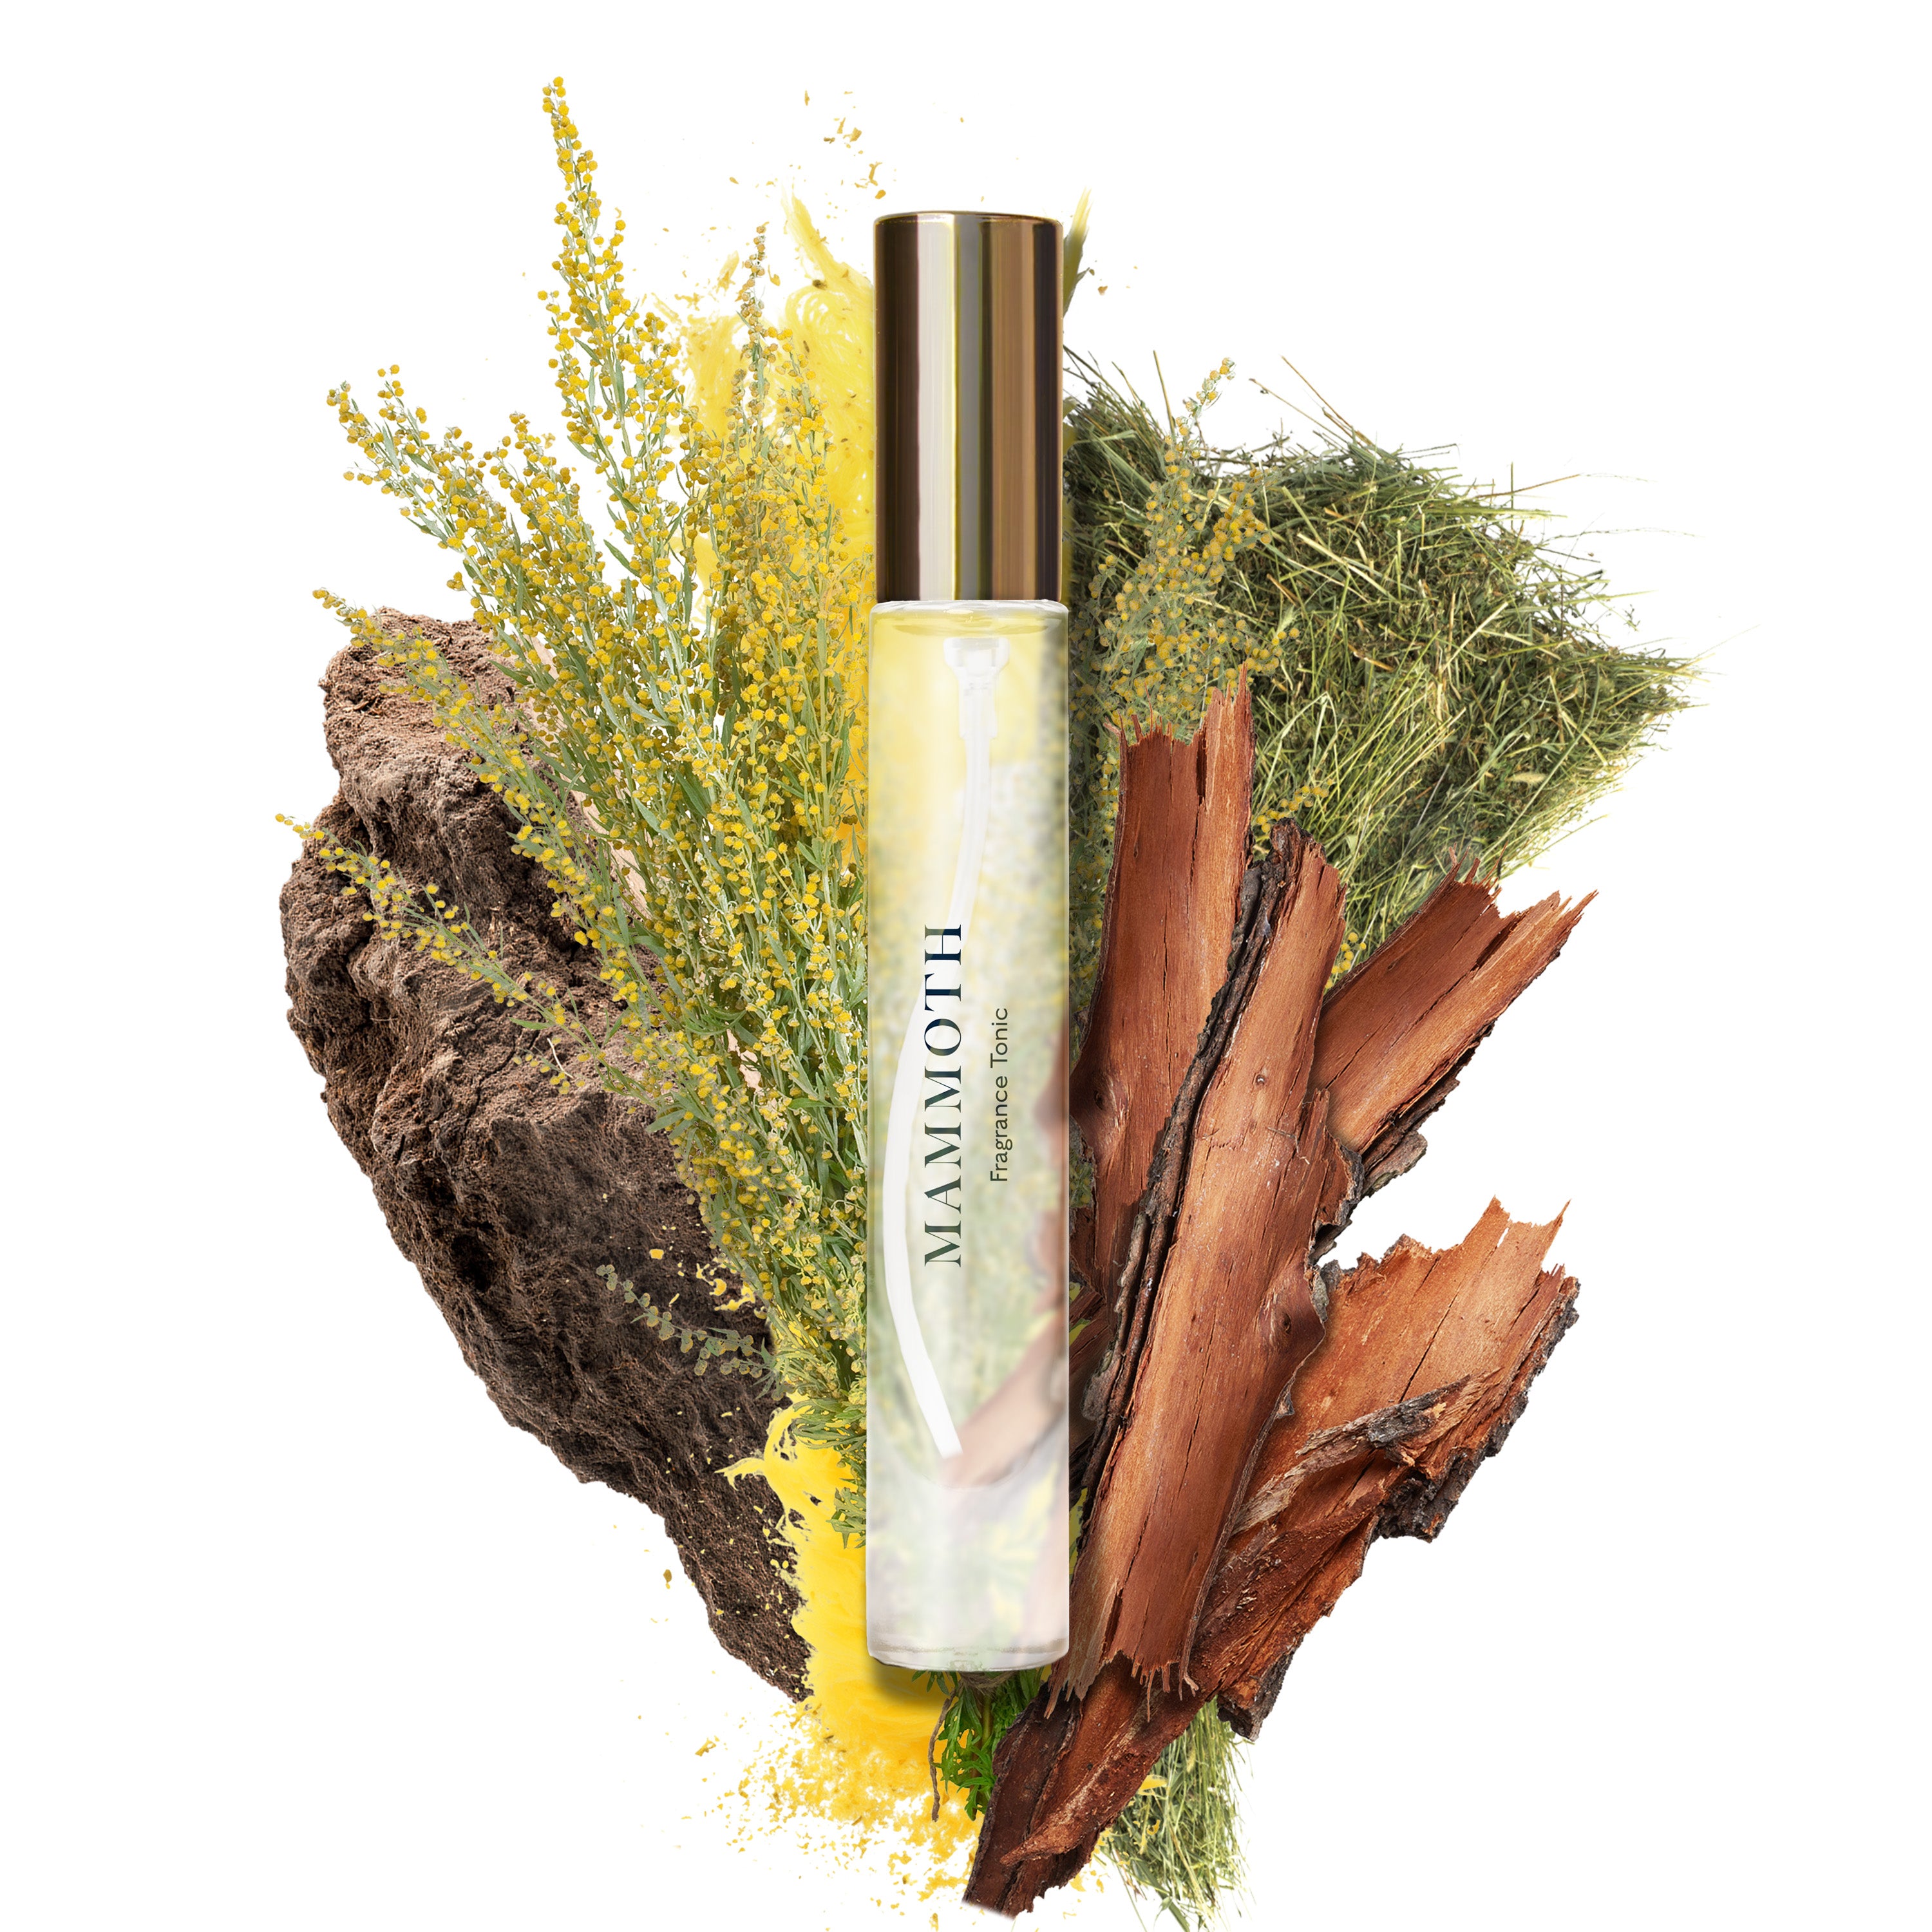 Caswell-Massey Yellowstone Mammoth Fragrance tonic bottle featured over scent notes found in the fragrance including mountain hay, and rich earth